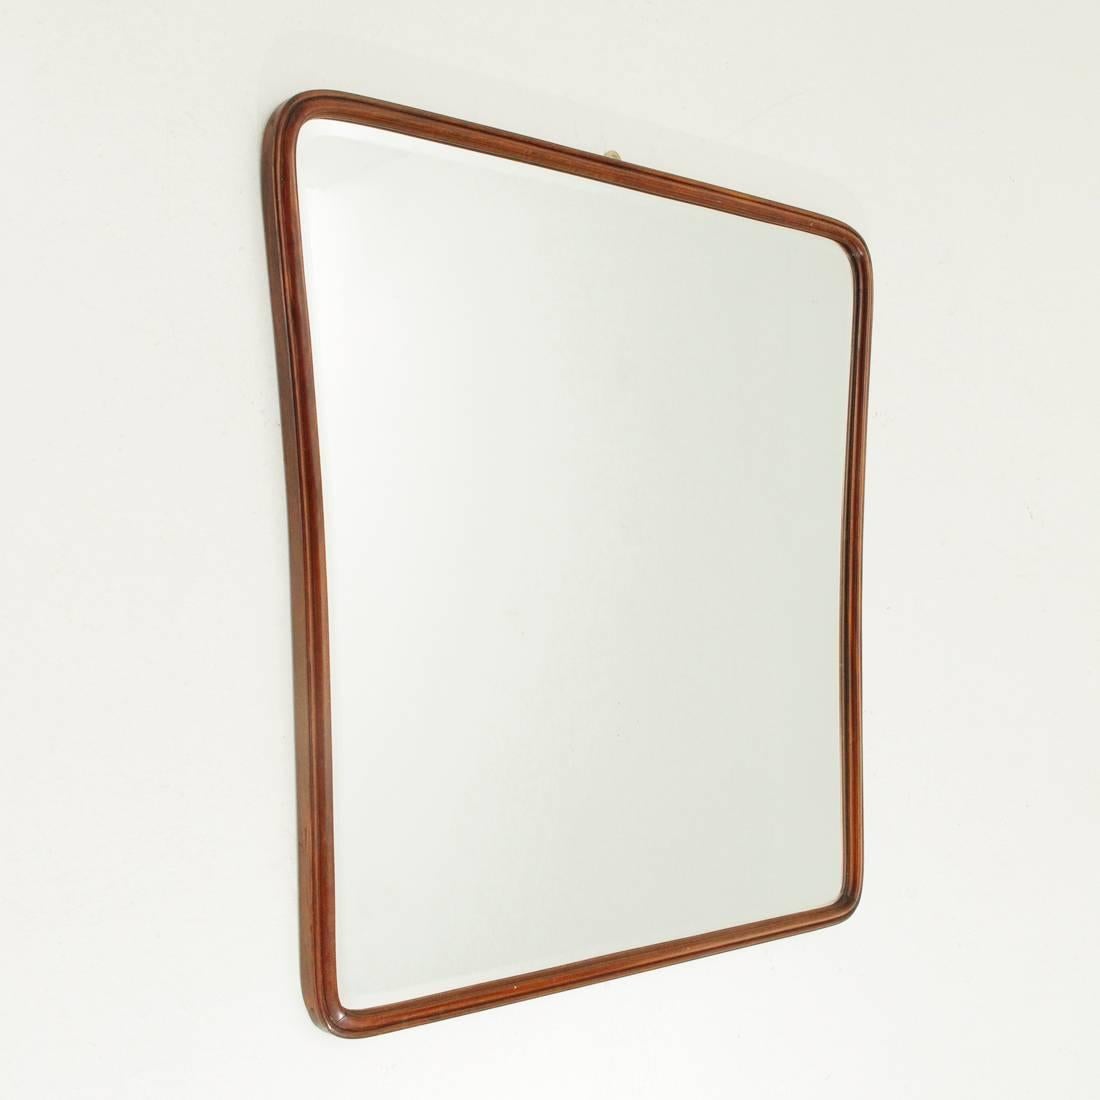 Elegant Italian mirror produced in the 1950s.
Wooden structure, surface mirrored glass, wood frame.
Good general conditions, some signs due to normal use over time.

Dimensions: Width 97 cm, depth 4 cm, height 97 cm.